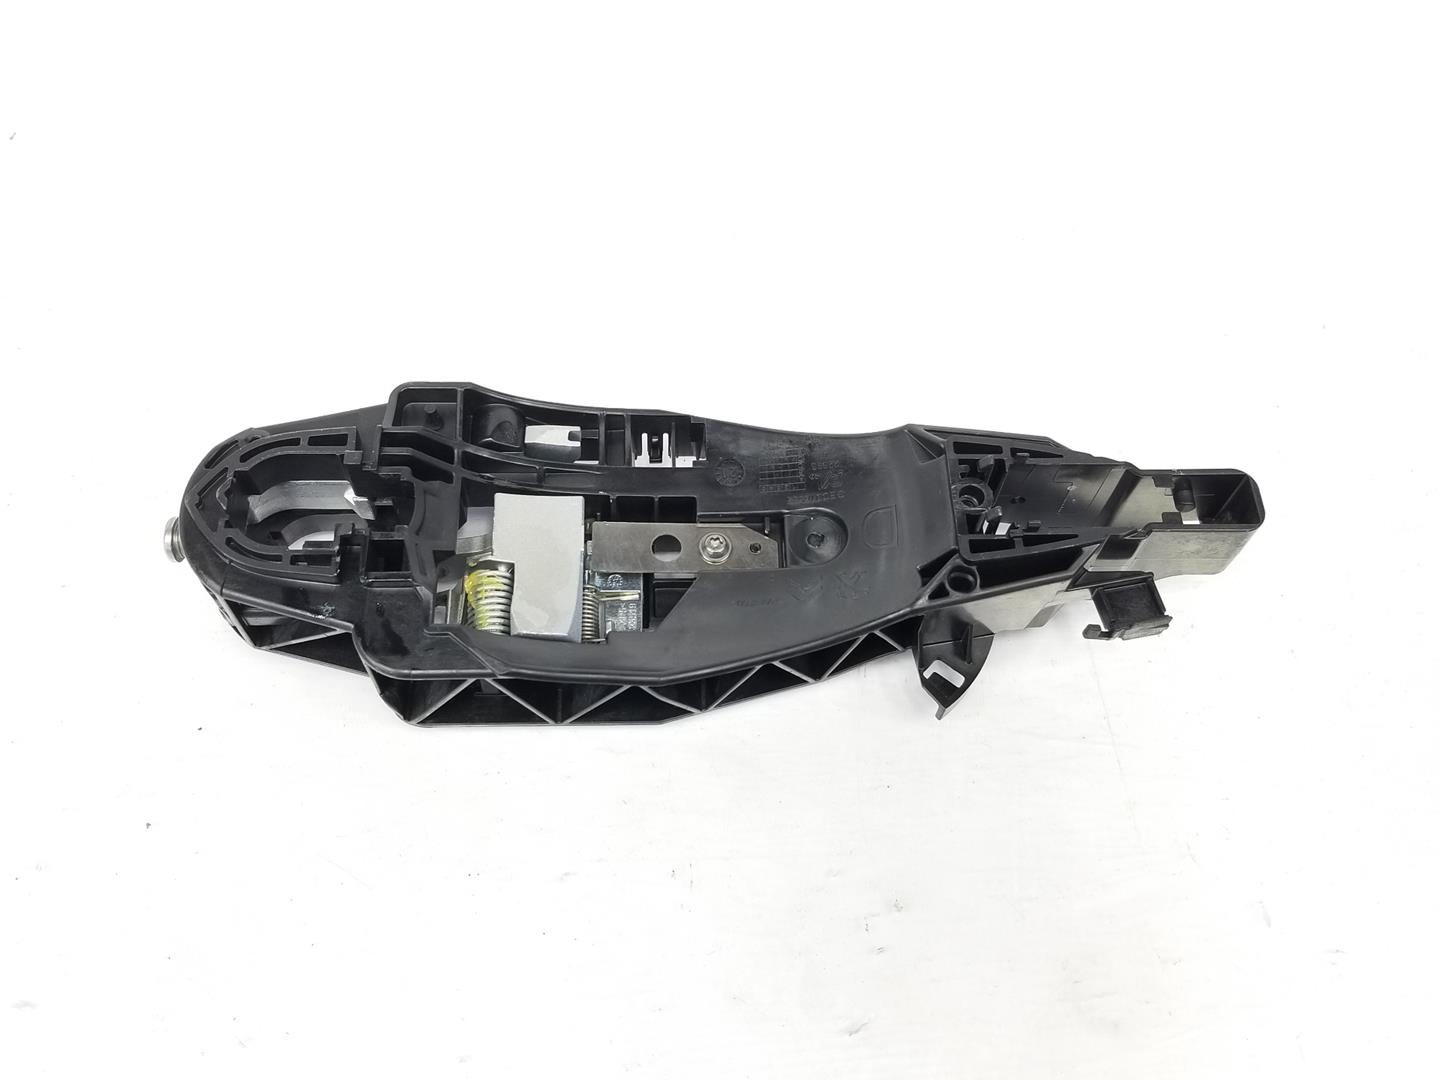 PEUGEOT 208 2 generation (2019-2023) Other Interior Parts 9802977180, 9802977180 24133437